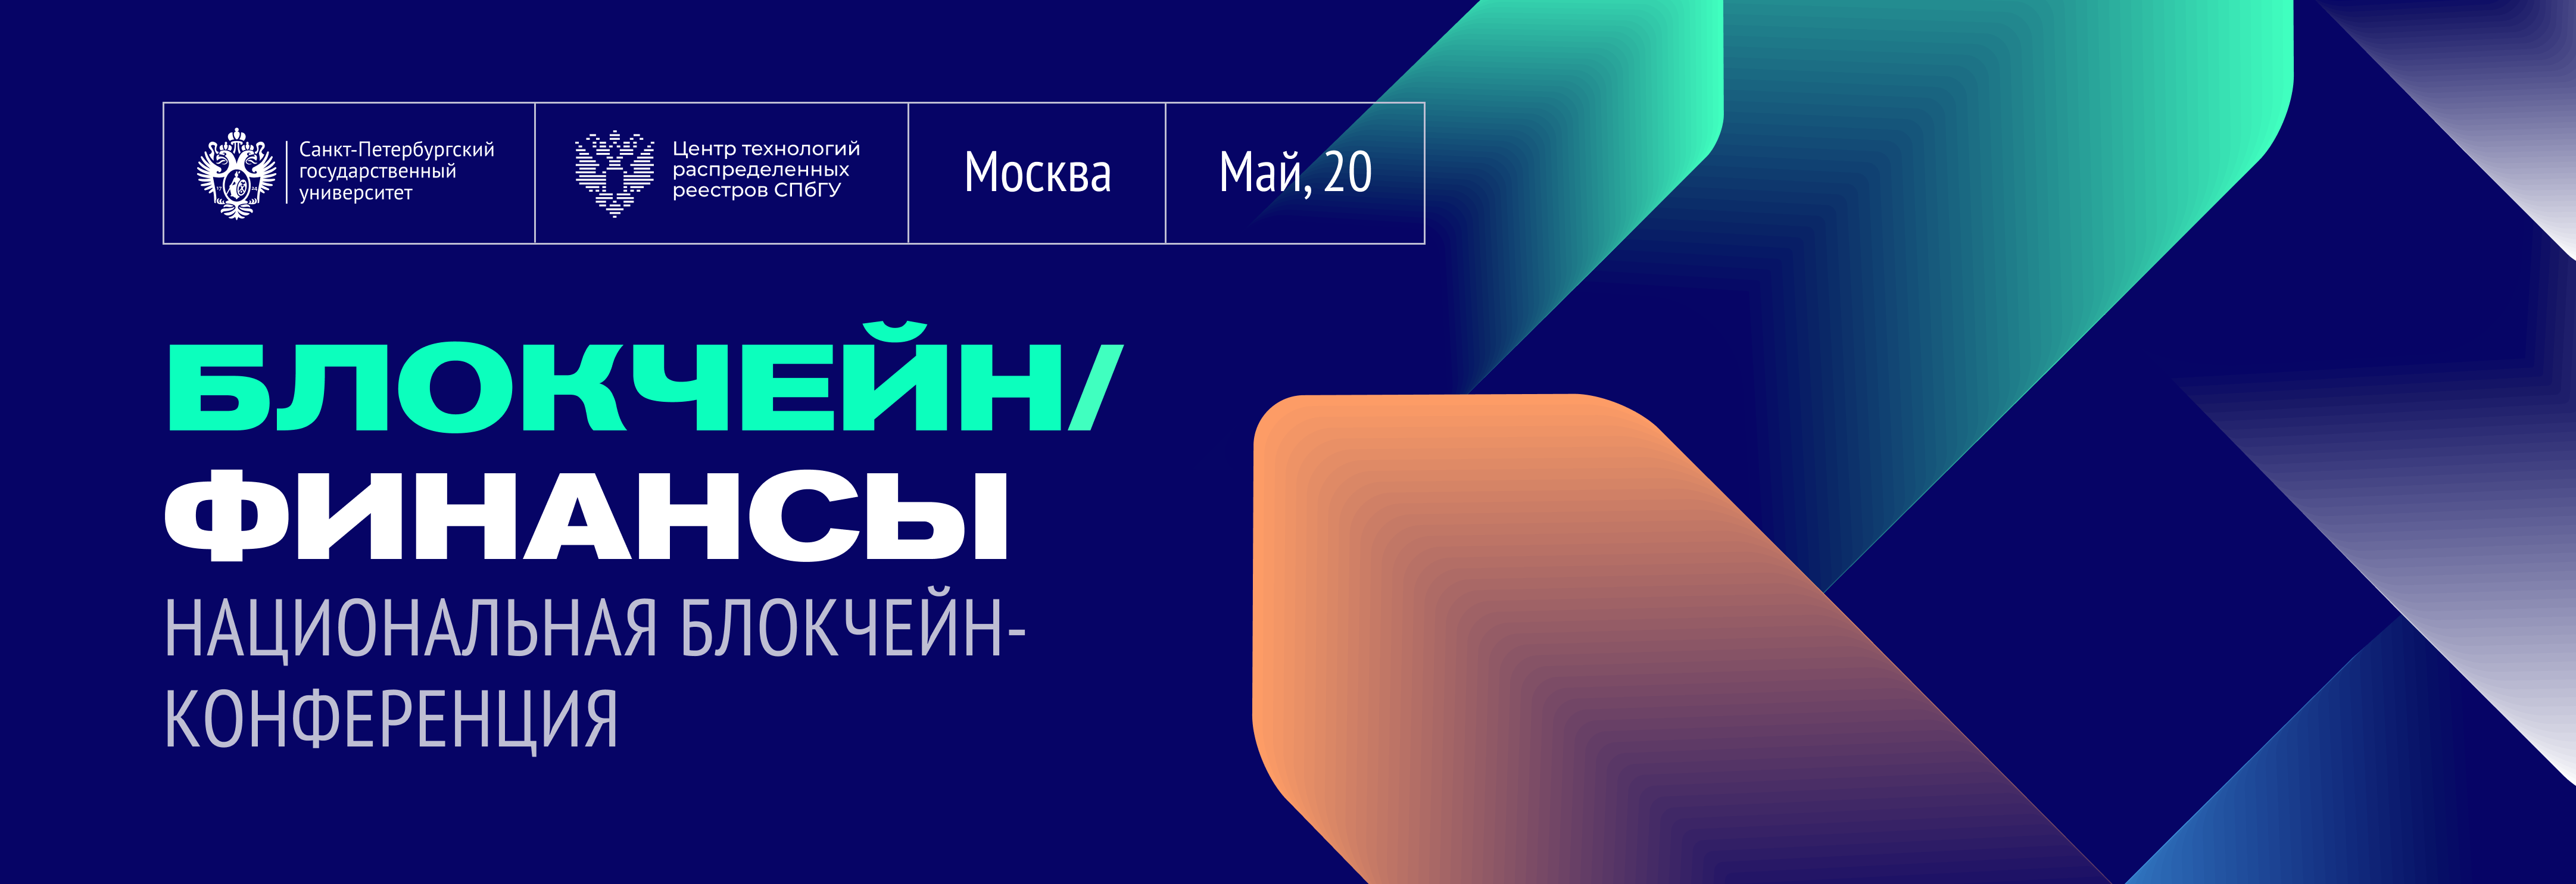 Transfer between Moscow airports and Blockchain / Finance 2021 conference